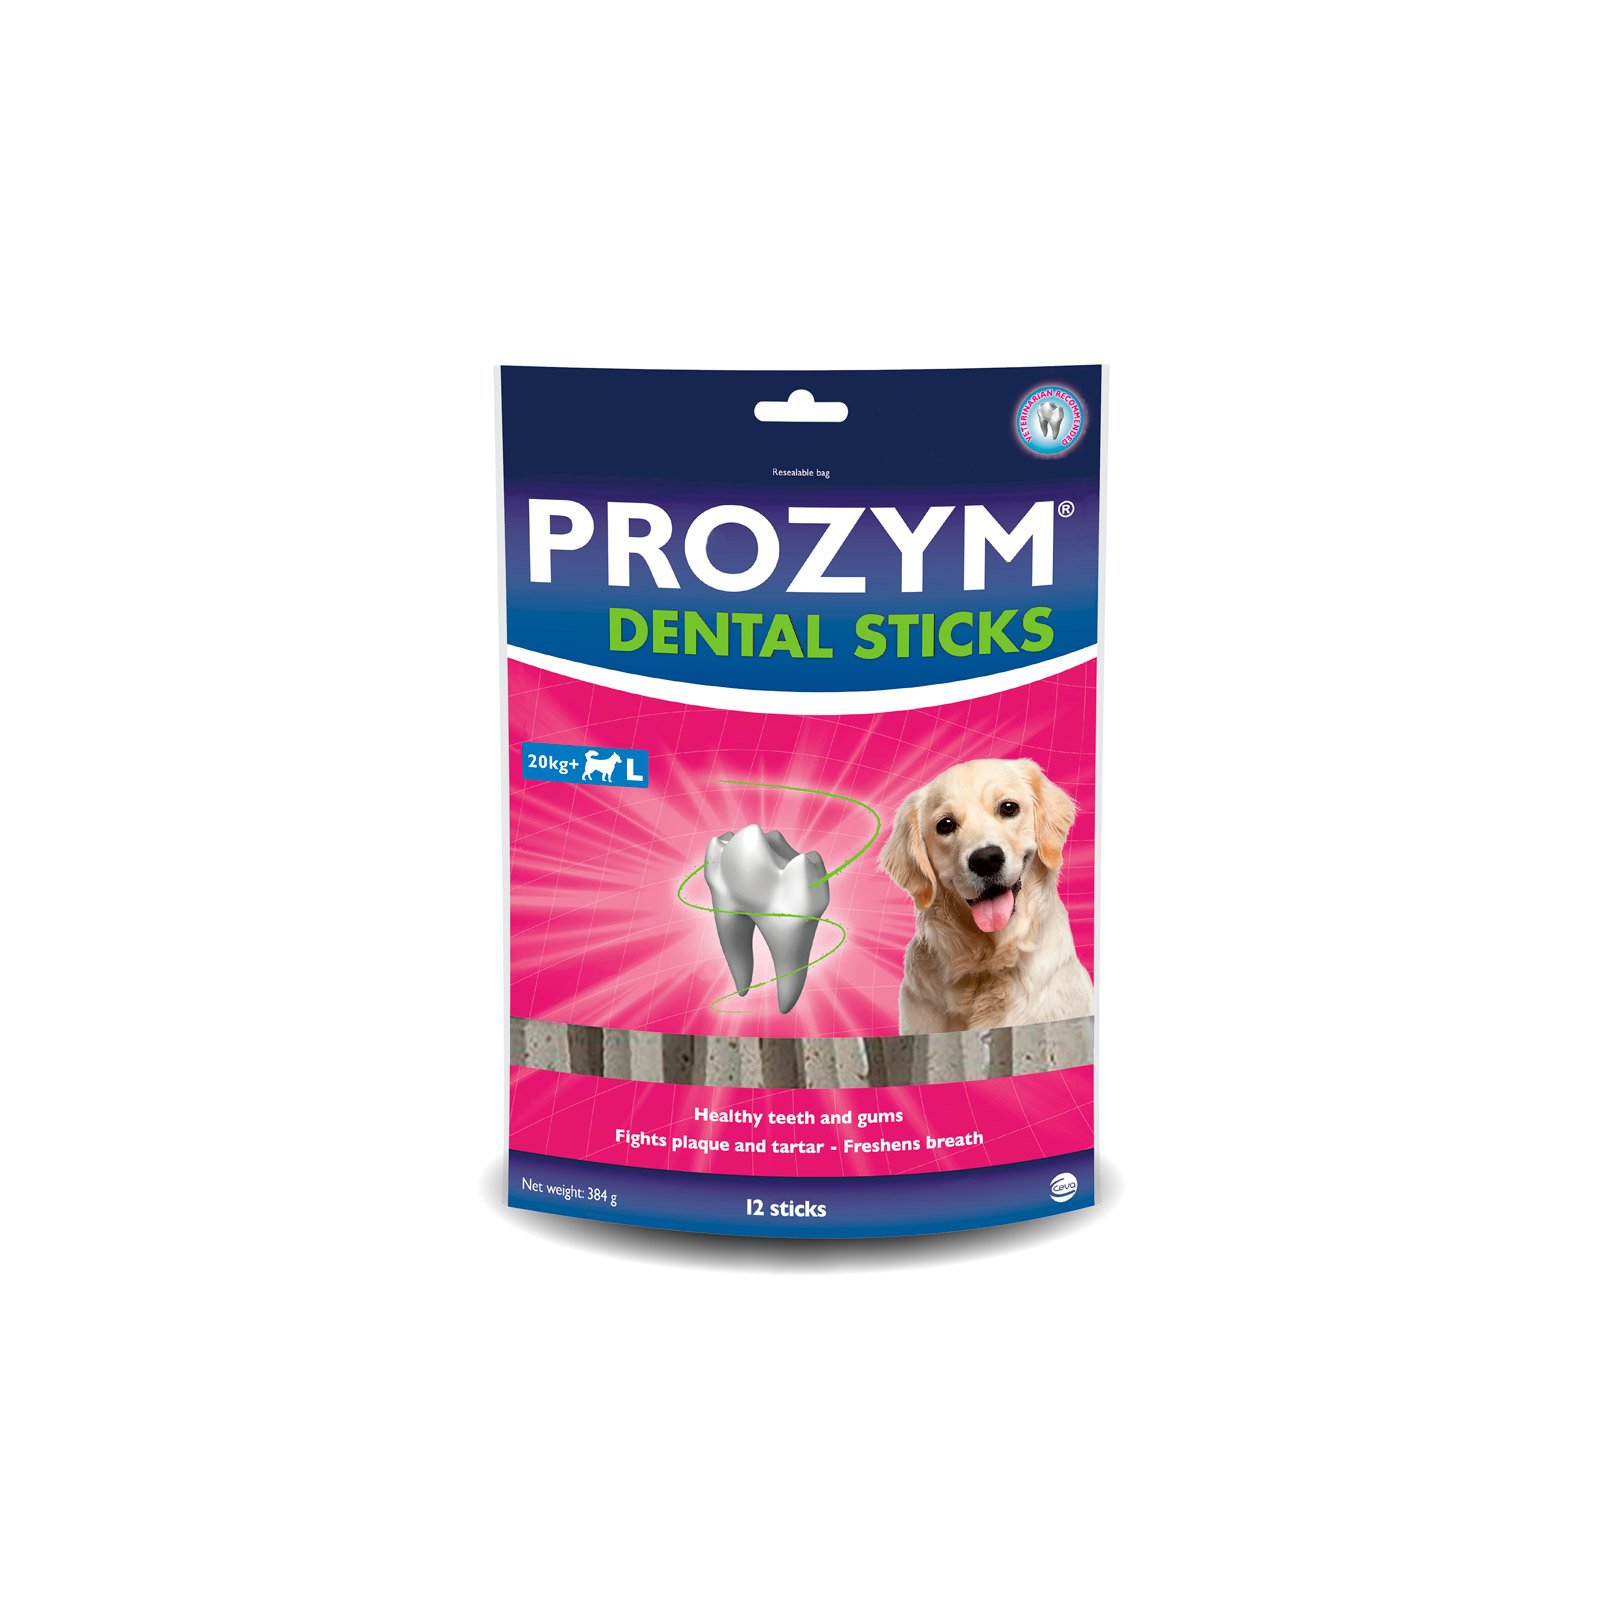 Prozym Rf2 Dental Sticks for Large Dogs Over 20 kg (12 Pieces)